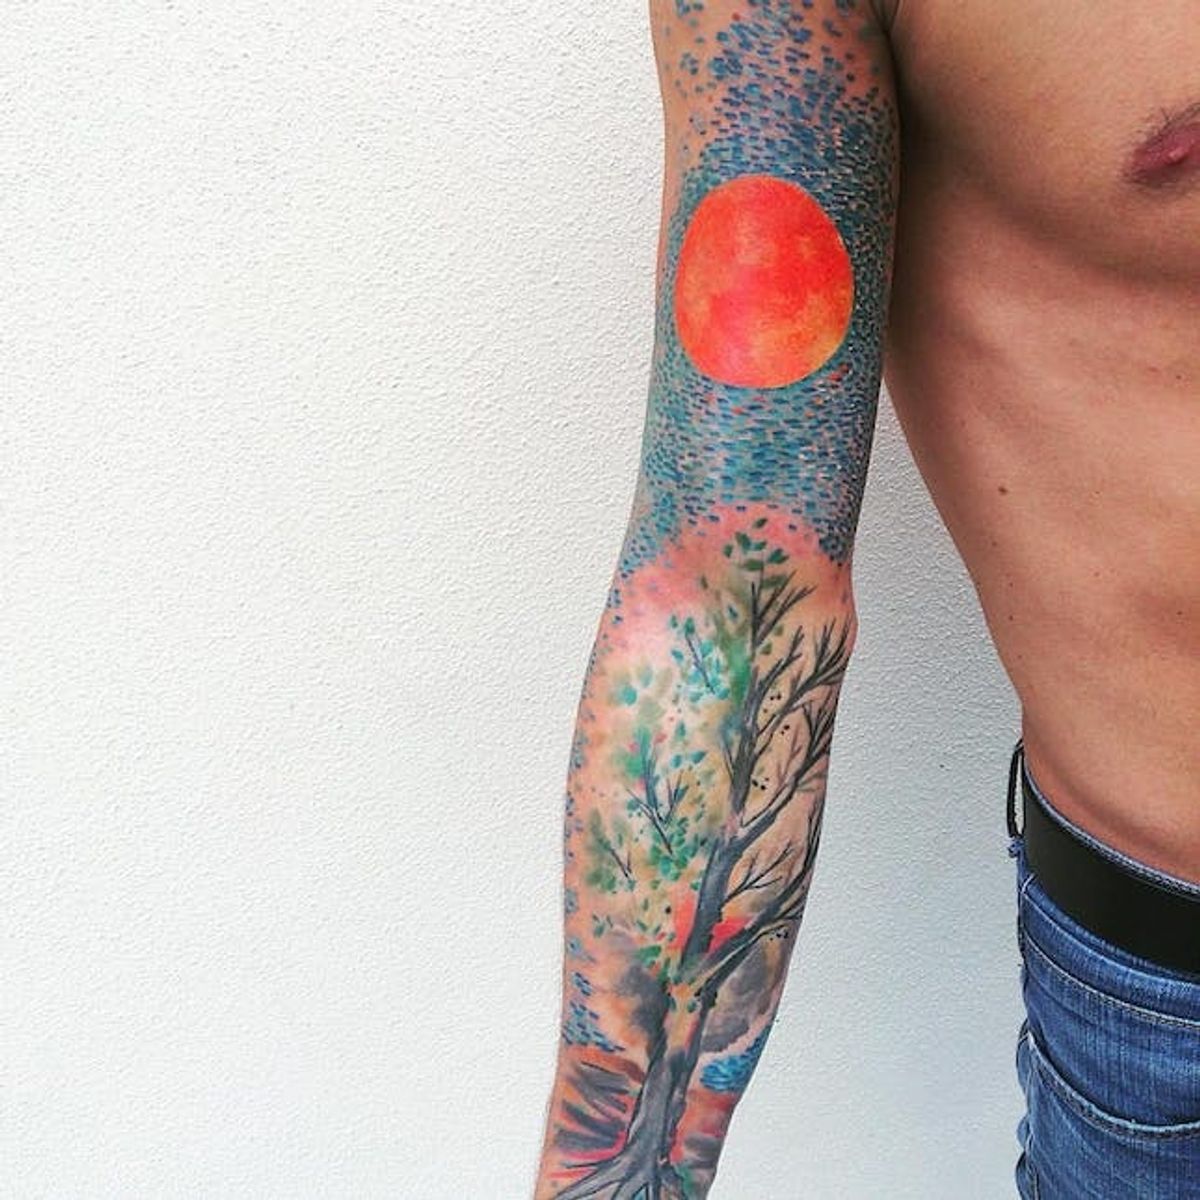 You Need to See This Tattoo Artist’s Abstract Watercolor Designs